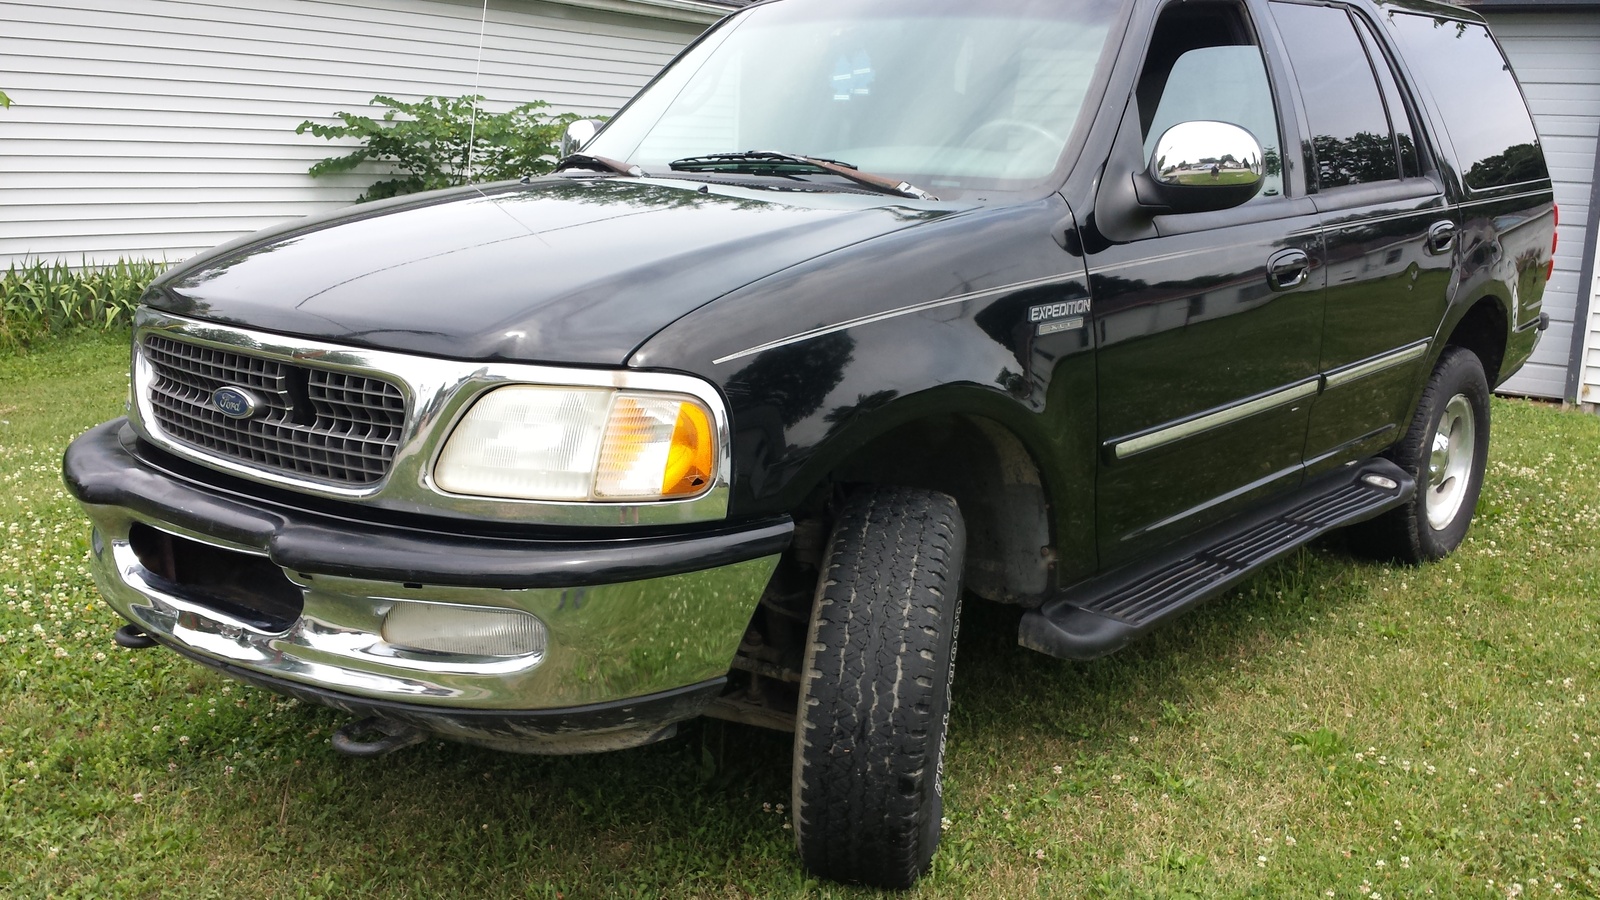 1998 Ford expedition gas mileage #2